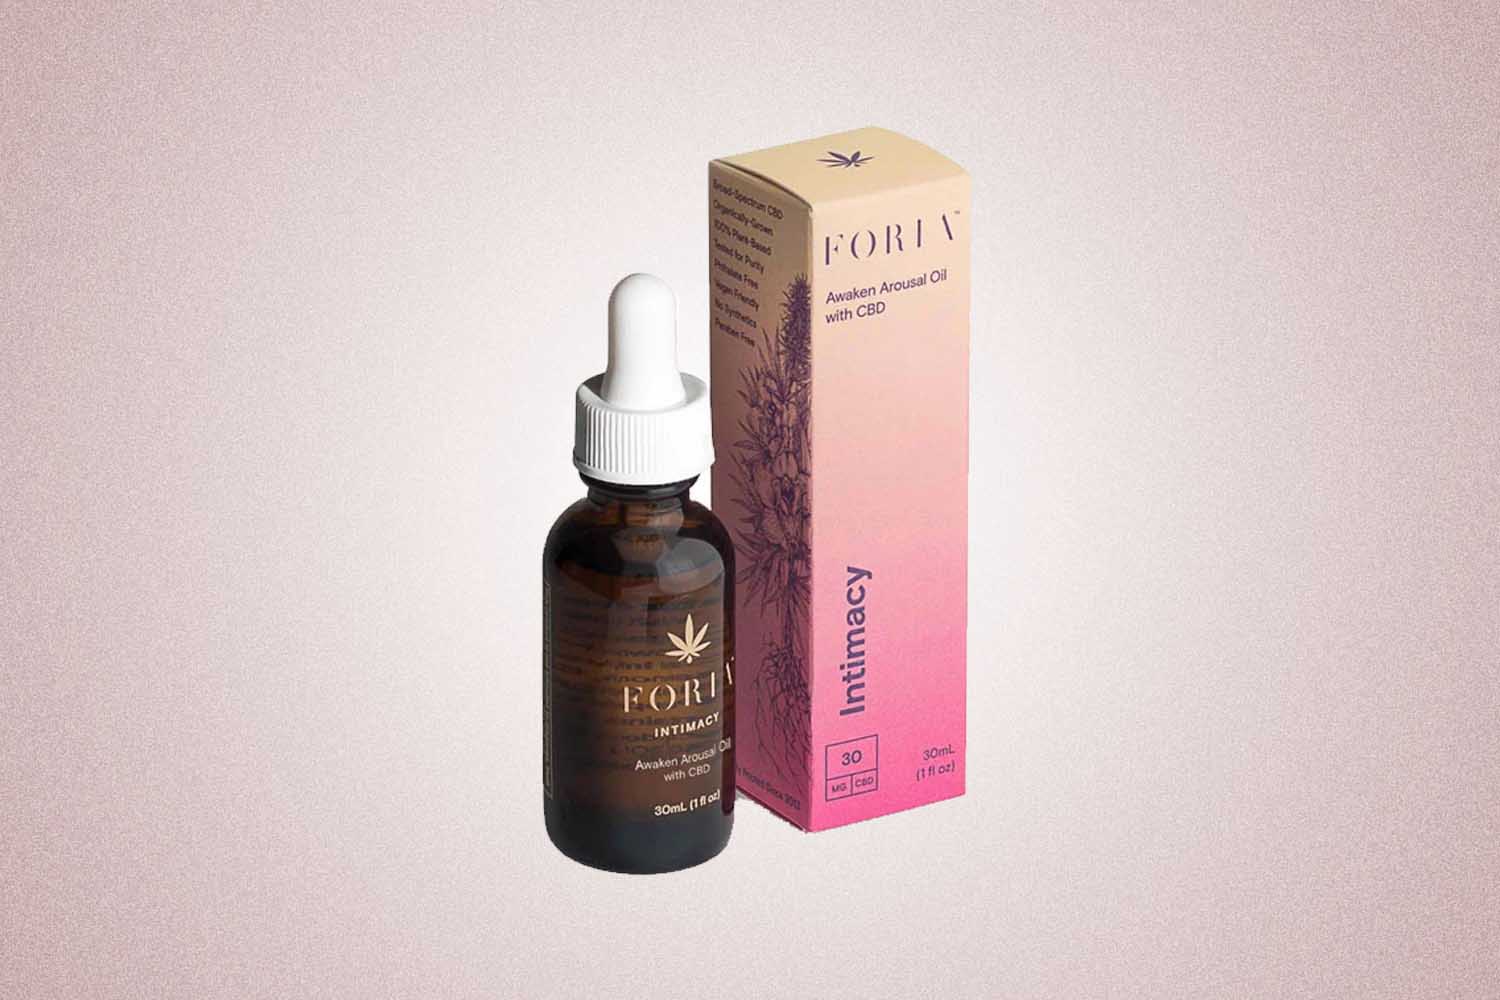 The Foria Awaken Arousal CBD Oil is a welcome addition to the bedroom when adding arousal oil to sex in 2022